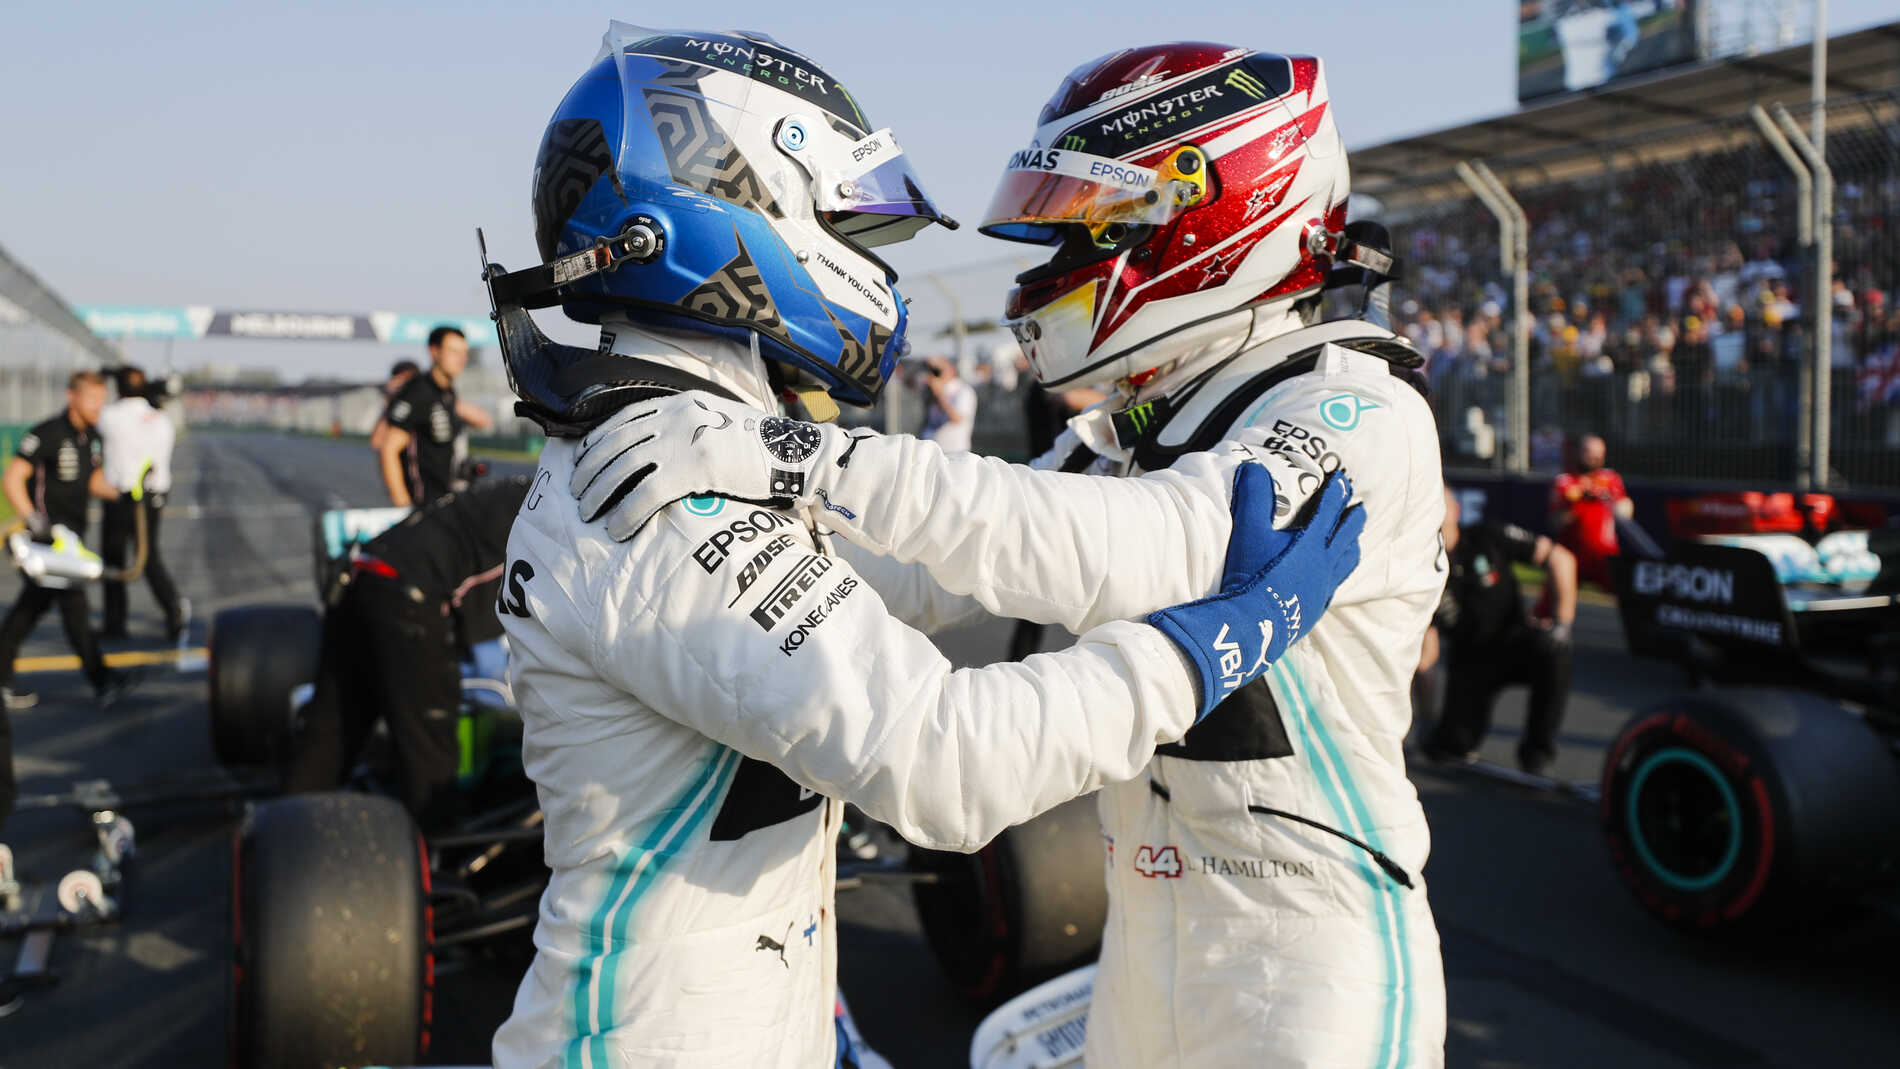 Behandle øre Brawl Qualifying report and highlights for the 2019 Australian Grand Prix:  Hamilton takes record sixth straight pole in Melbourne | Formula 1®